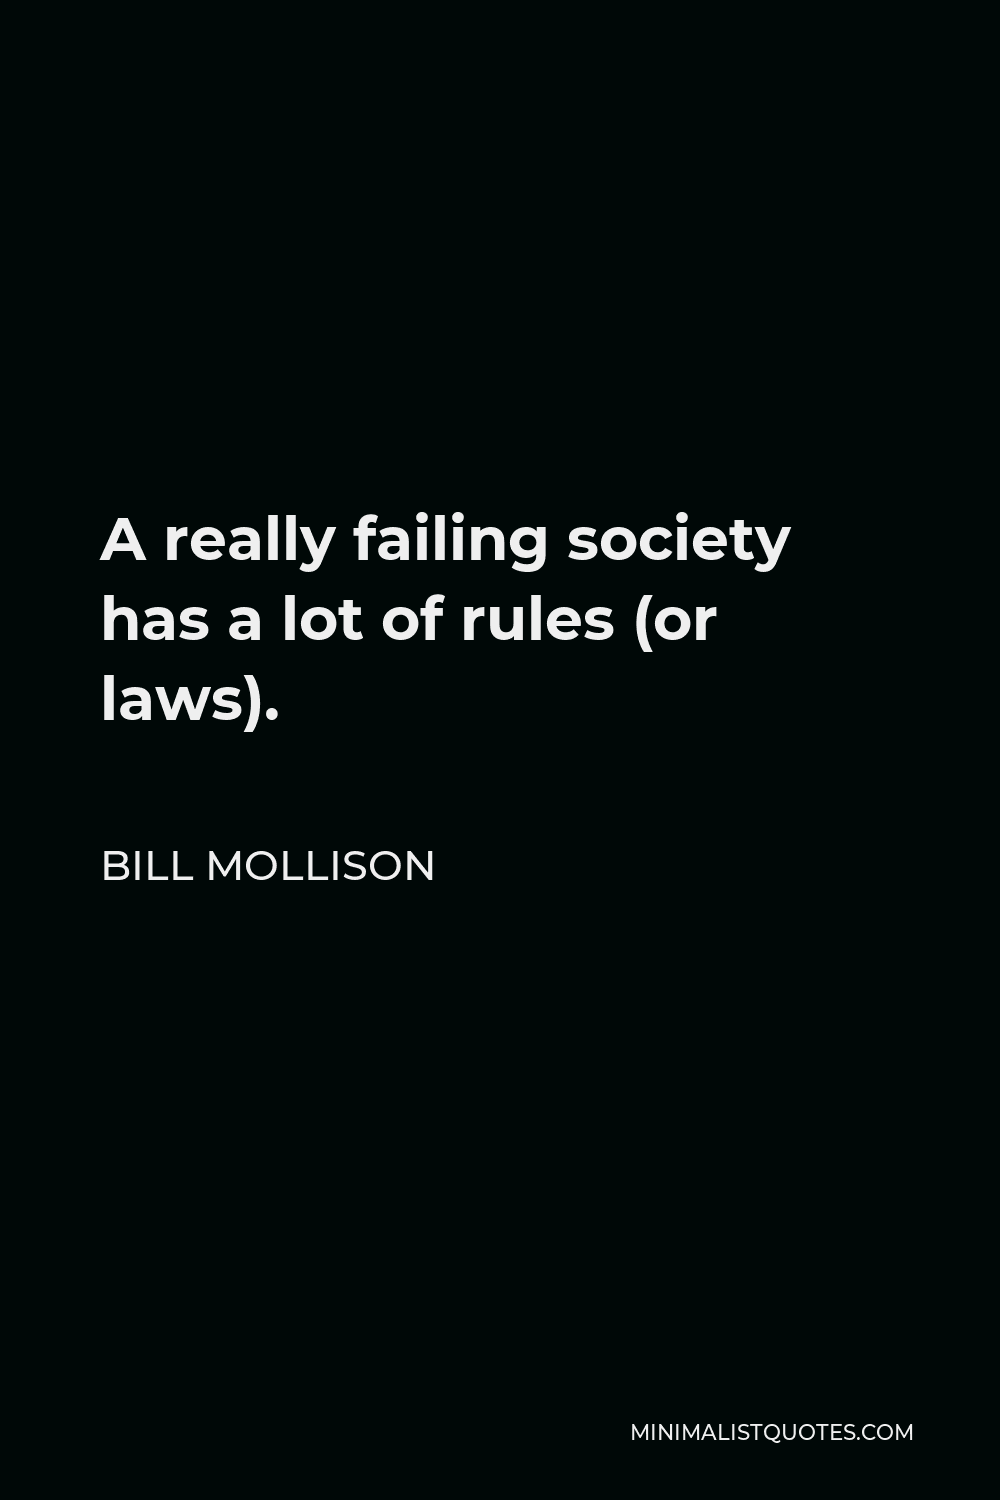 Bill Mollison Quote - A really failing society has a lot of rules (or laws).